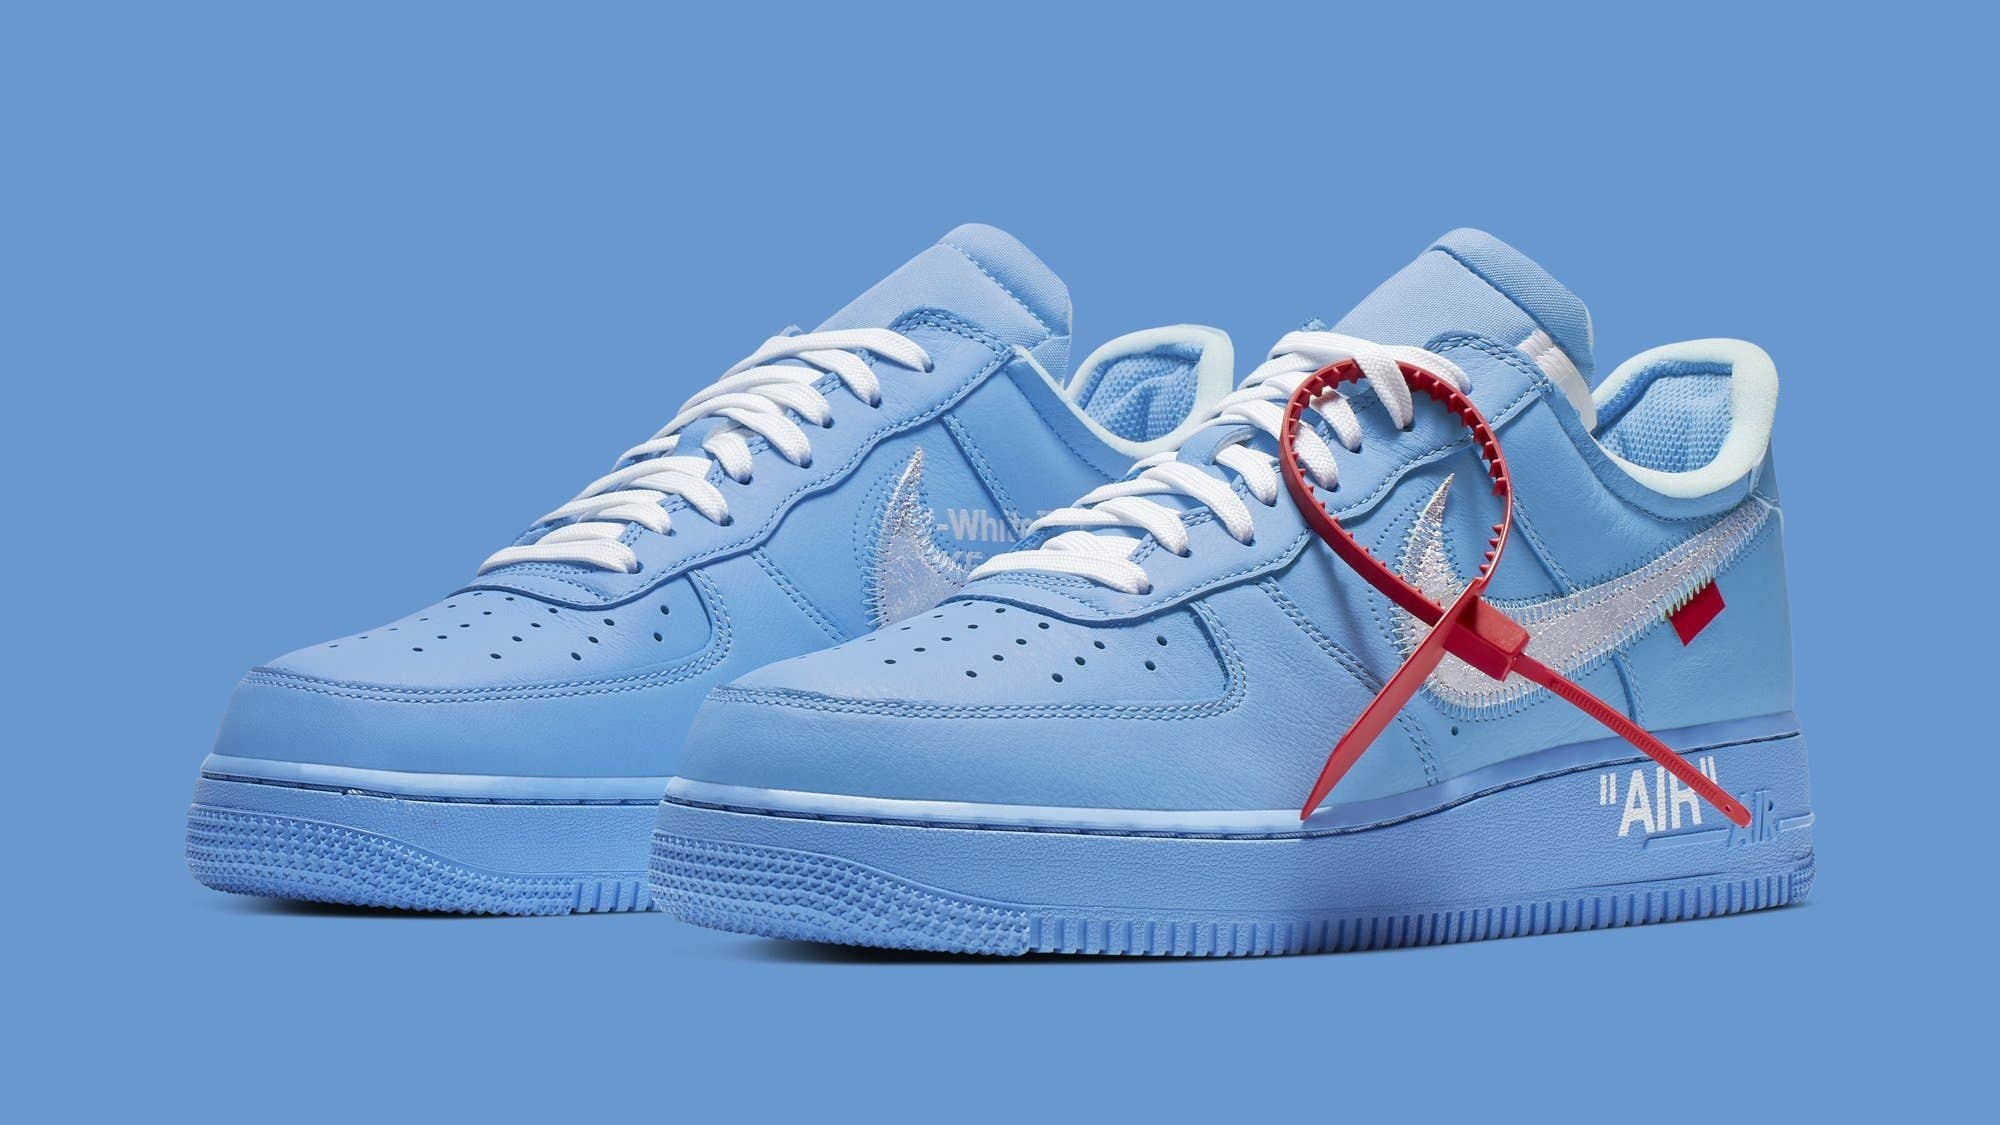 Off White x Nike Air Force 1 Low 'MCA Chicago' CI1173 400 (Pair)